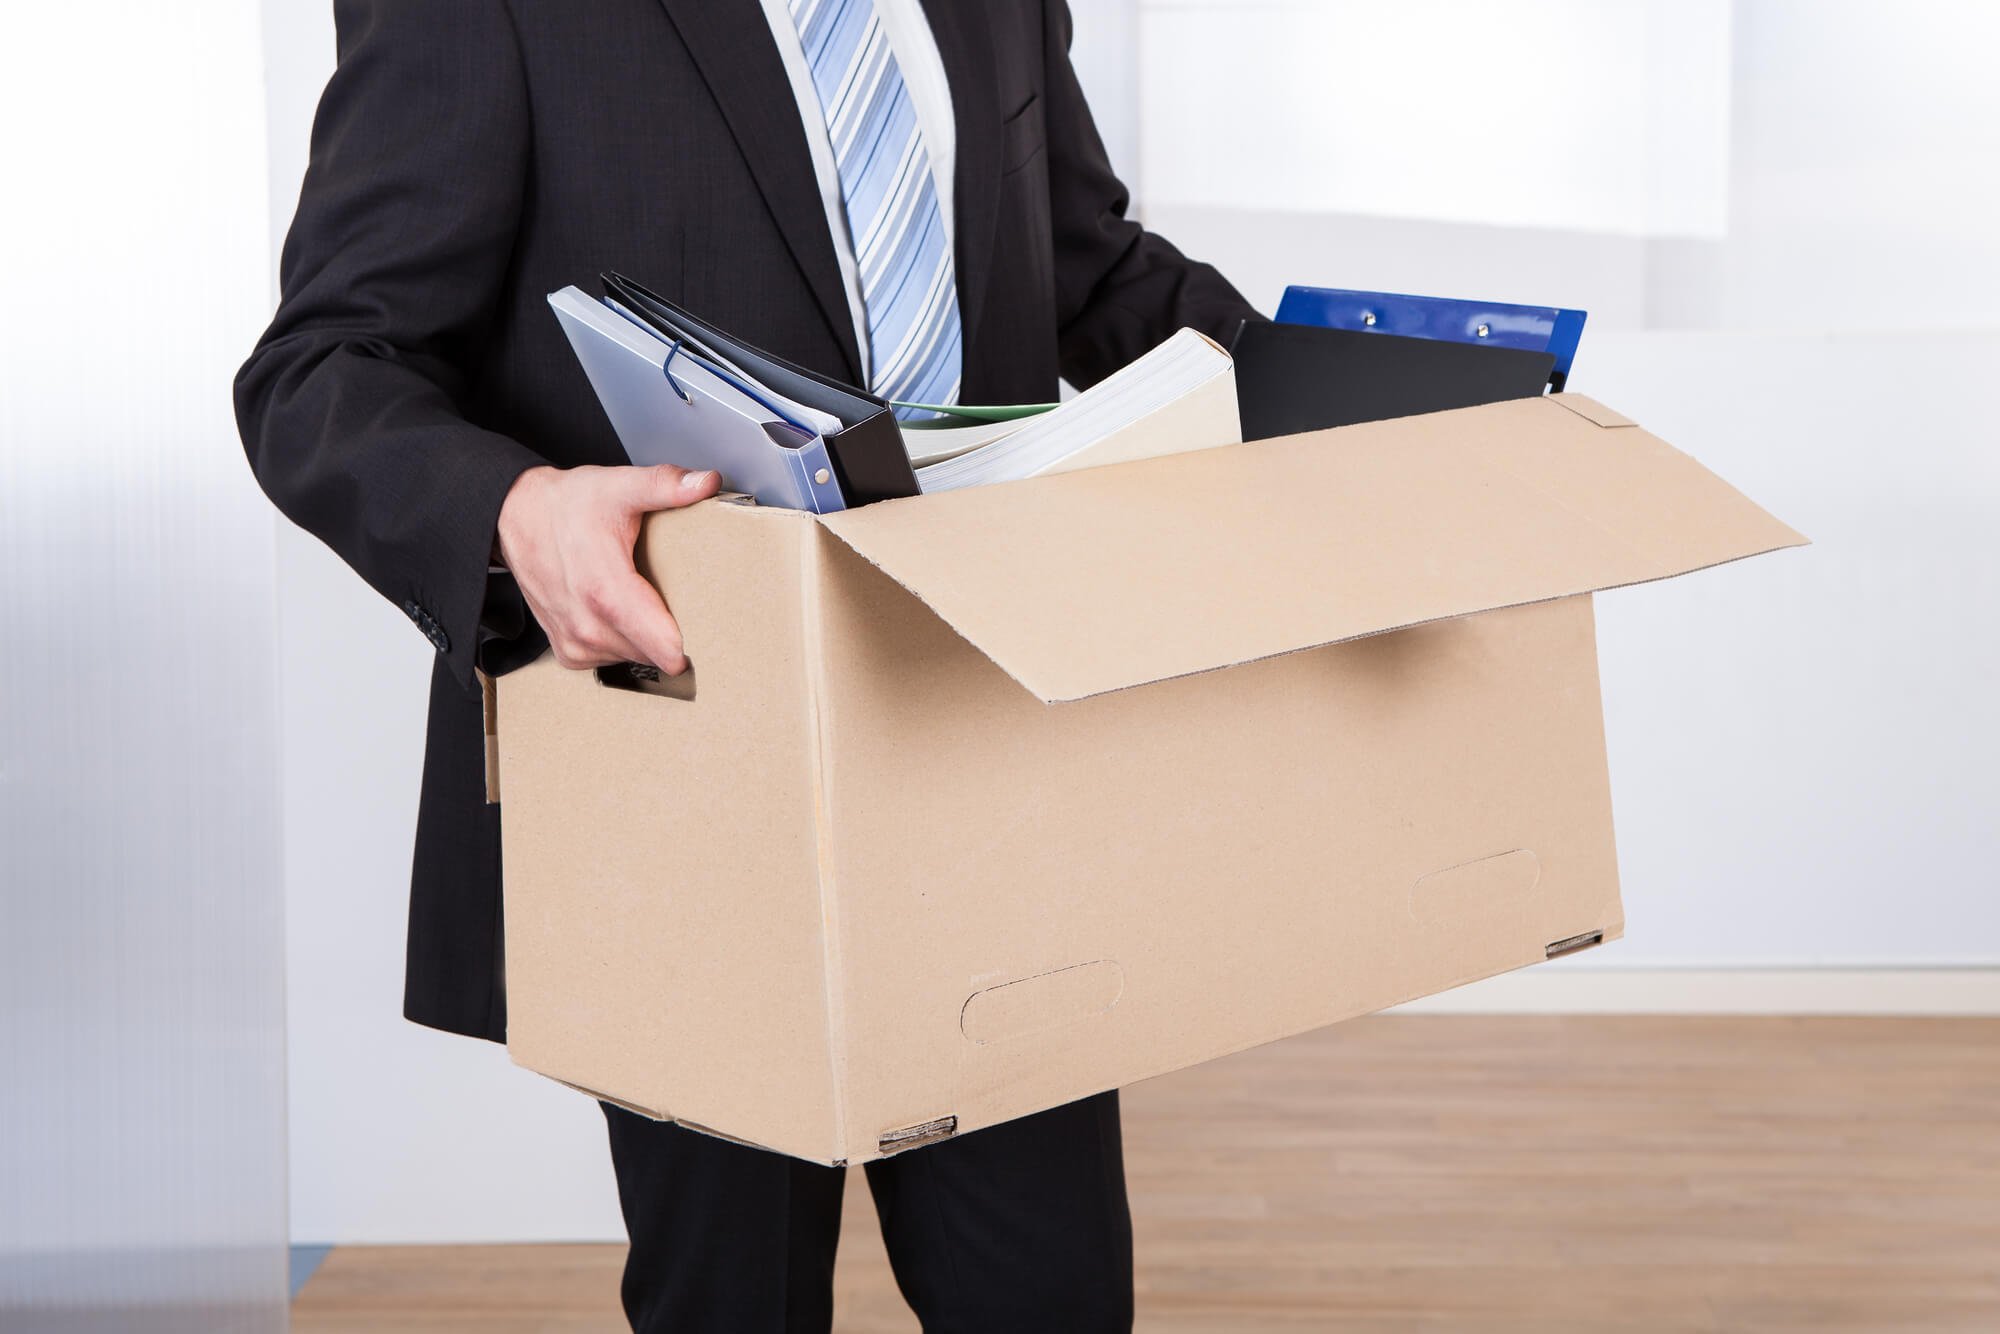 With an office move checklist and a great commercial mover like Cento Moving, you'll be back in business in no time!